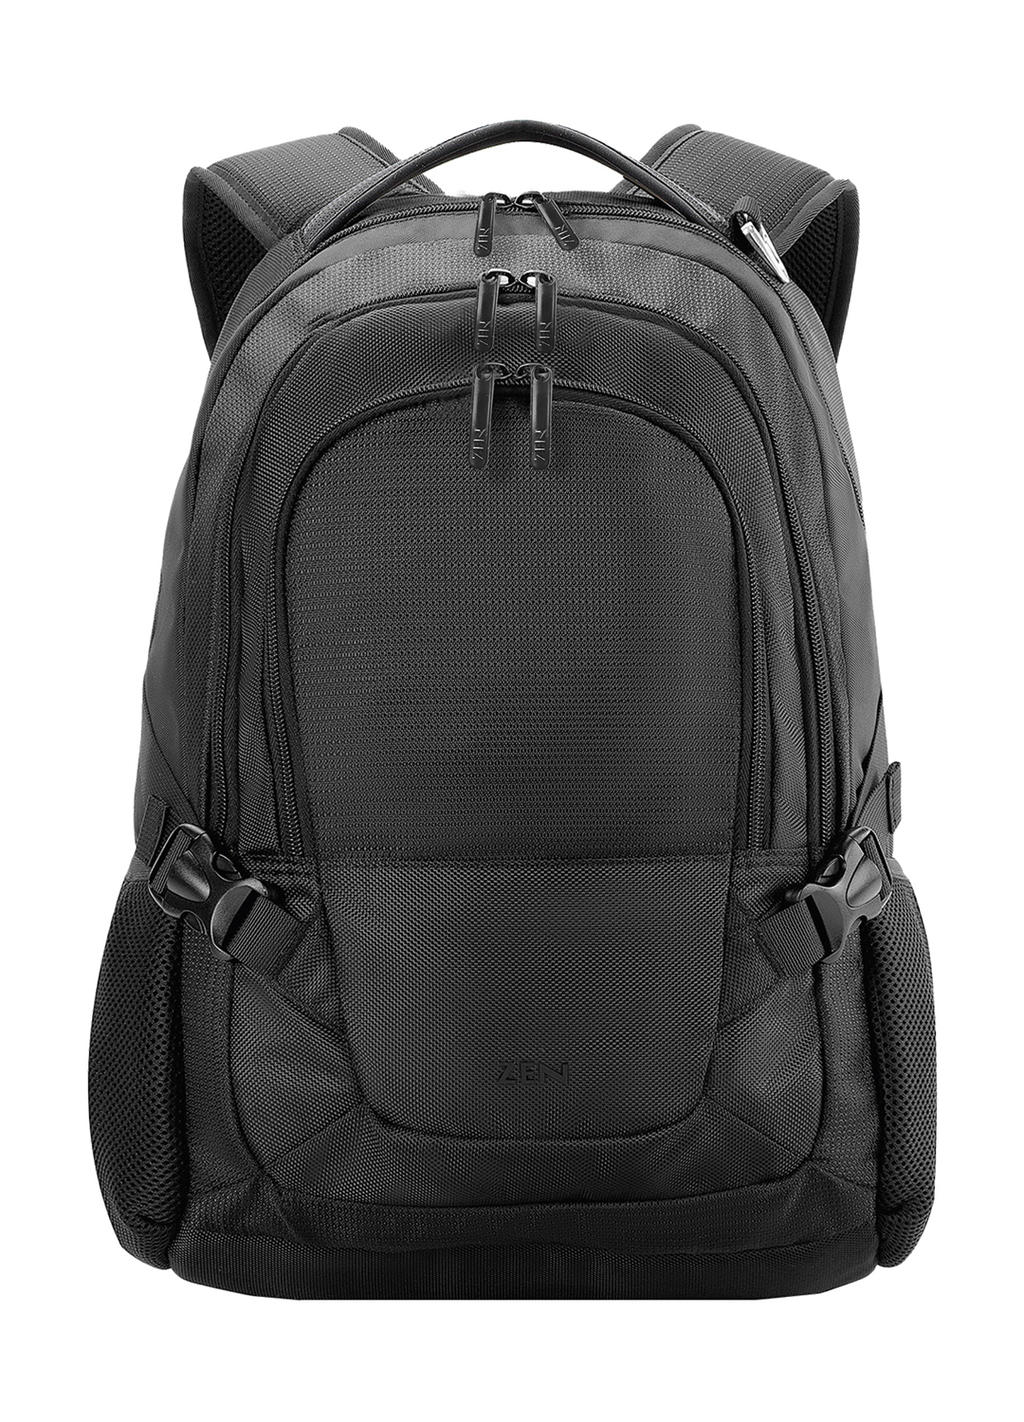 Lausanne Outdoor Laptop Backpack